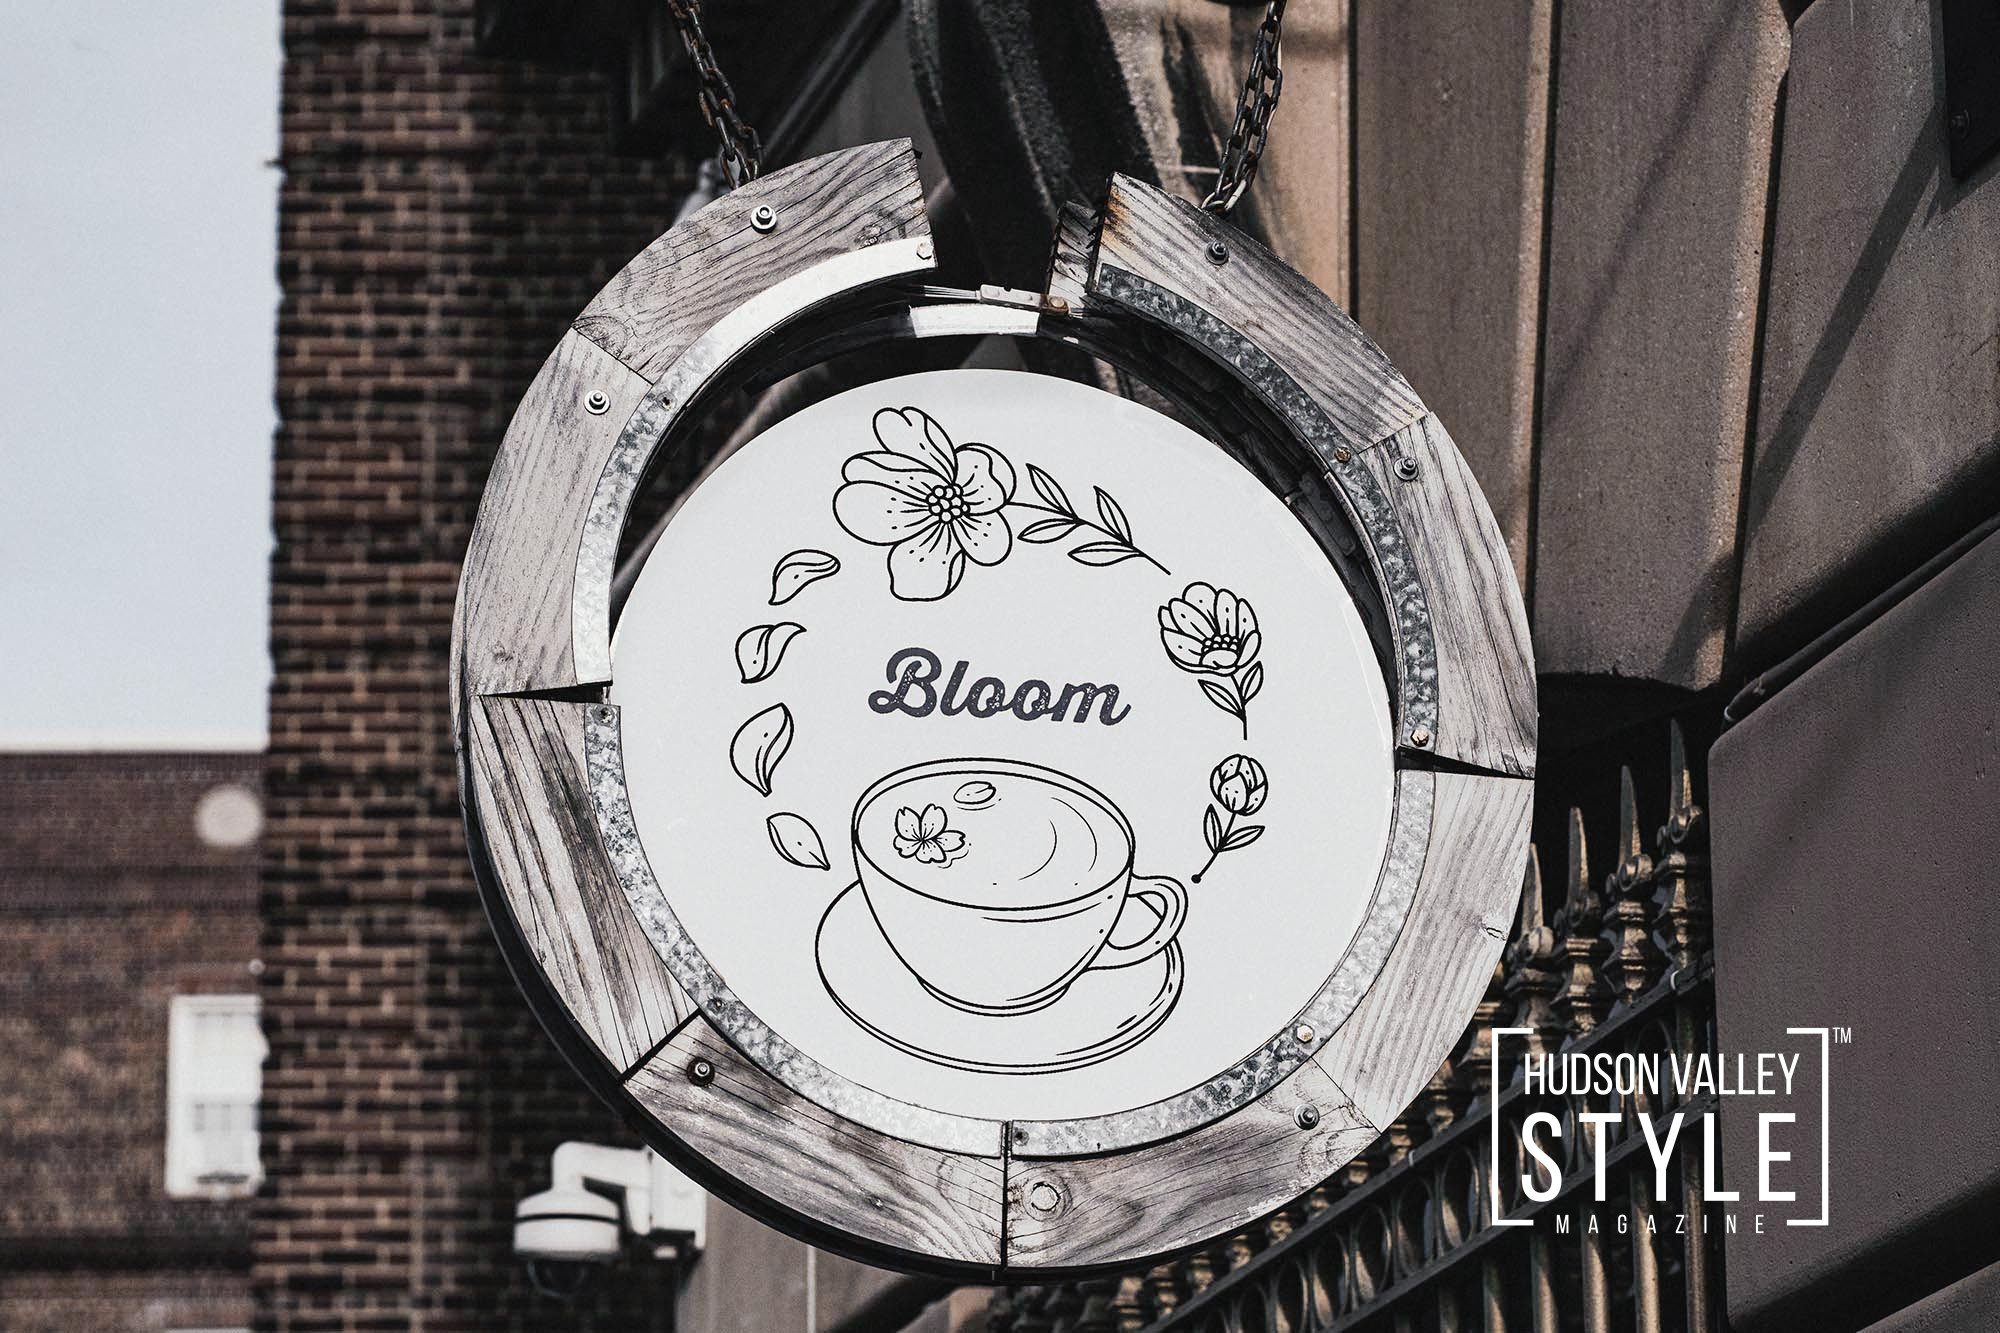 Cafe Bloom NYC: A Hidden Gem in Washington Heights for a Cozy and Delicious Brunch Experience – Restaurant Reviews with Photographer Maxwell Alexander